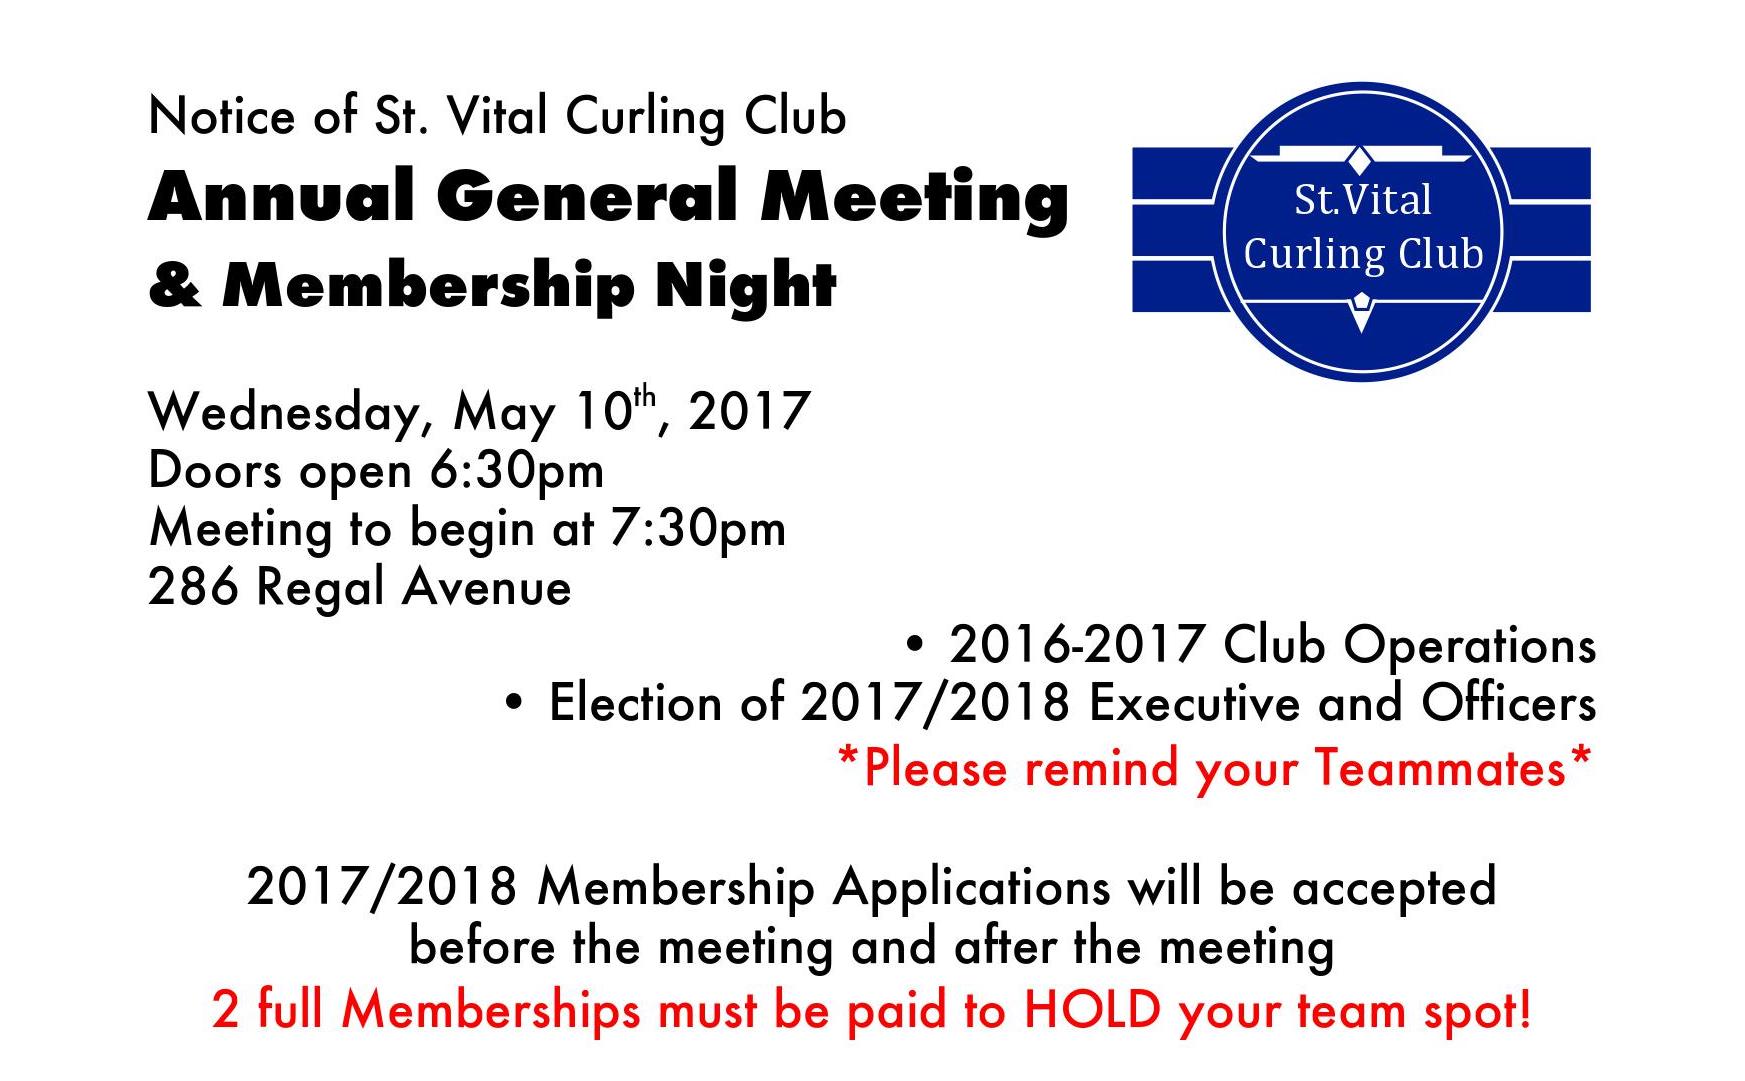 SVCC Annual General Meeting - May 10th